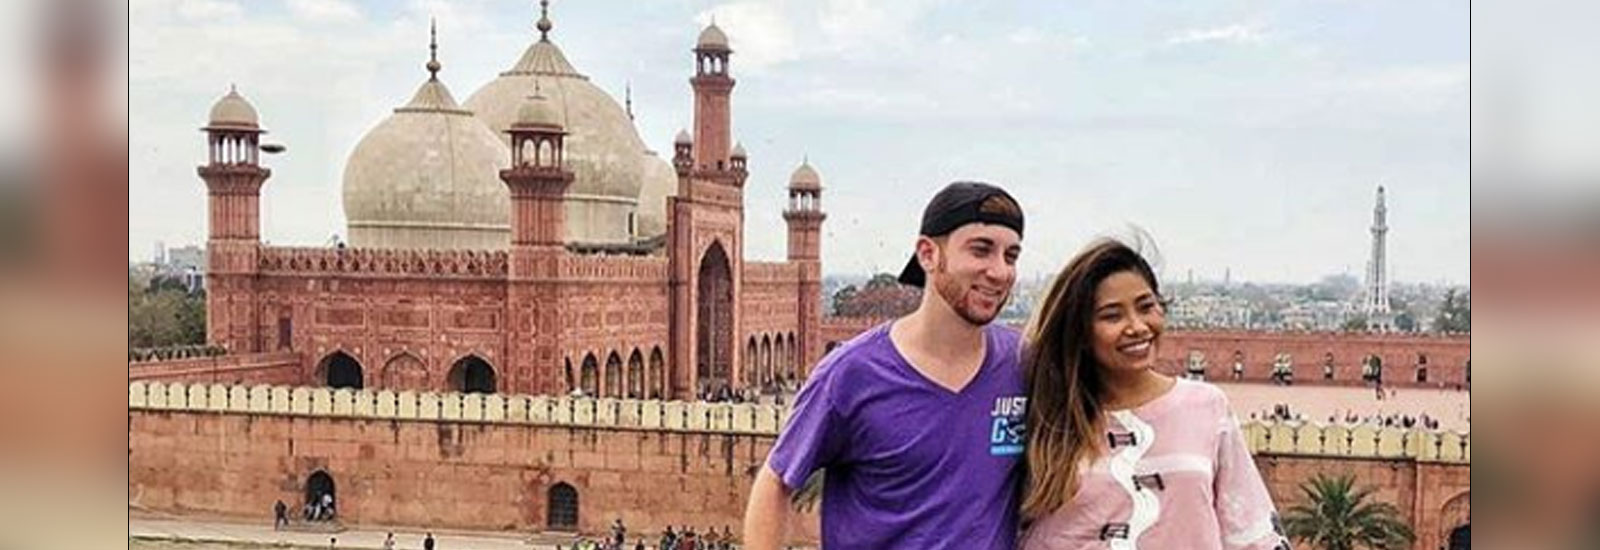 Drew Binsky in Pakistan - The travel blogger taking the world by storm